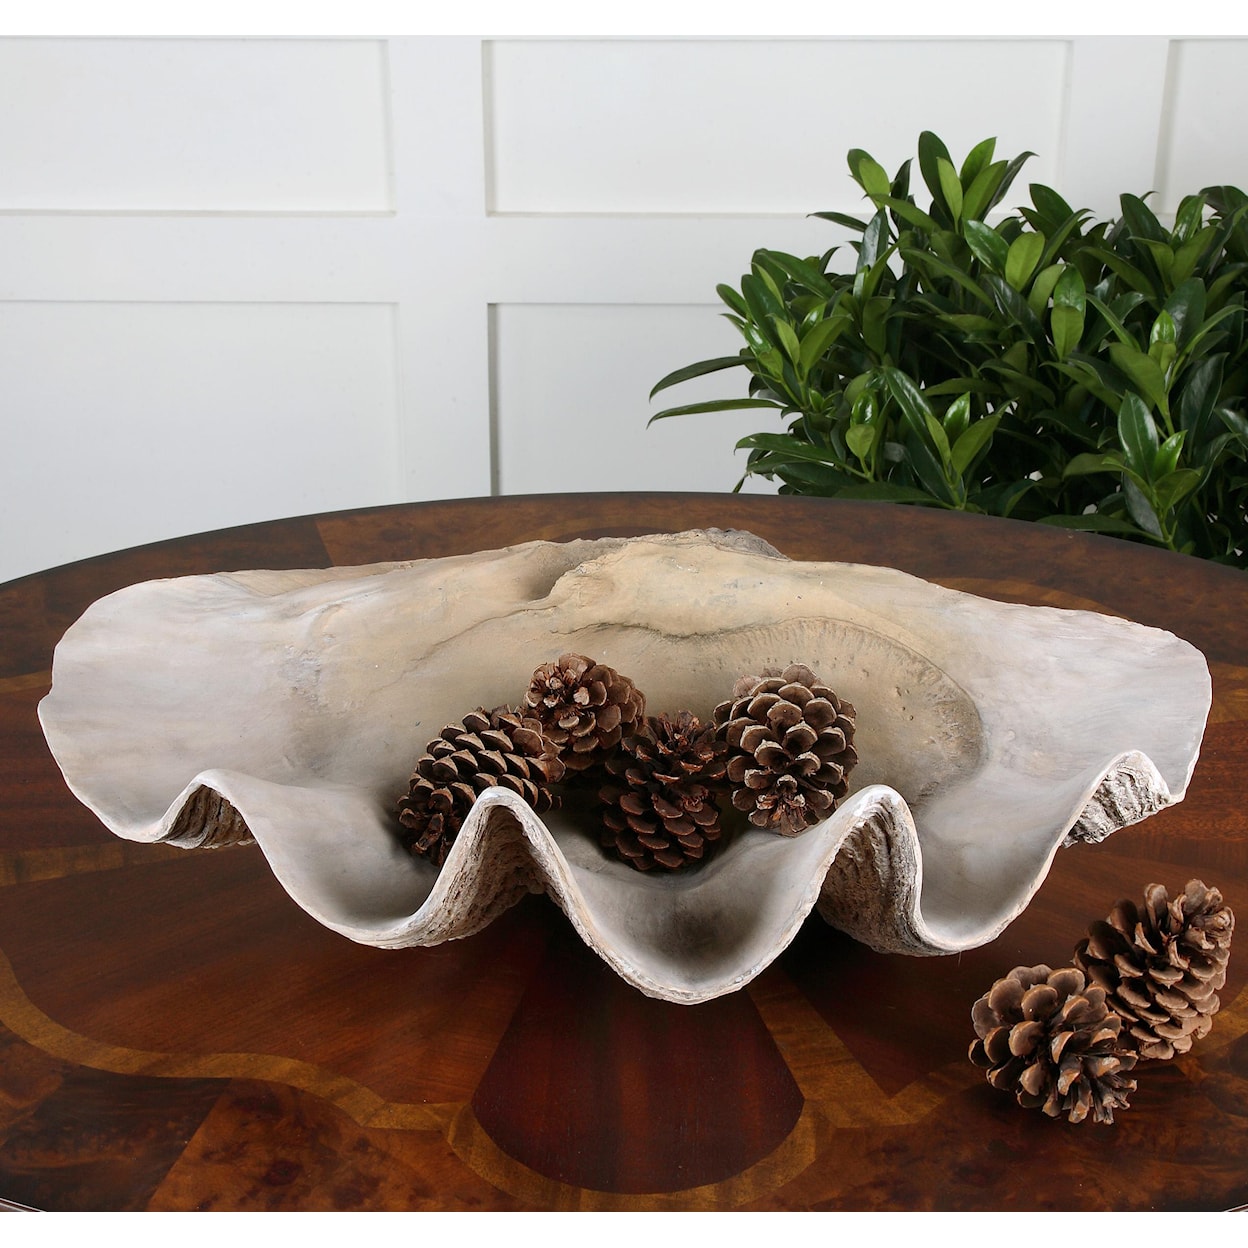 Uttermost Accessories Clam Shell Bowl